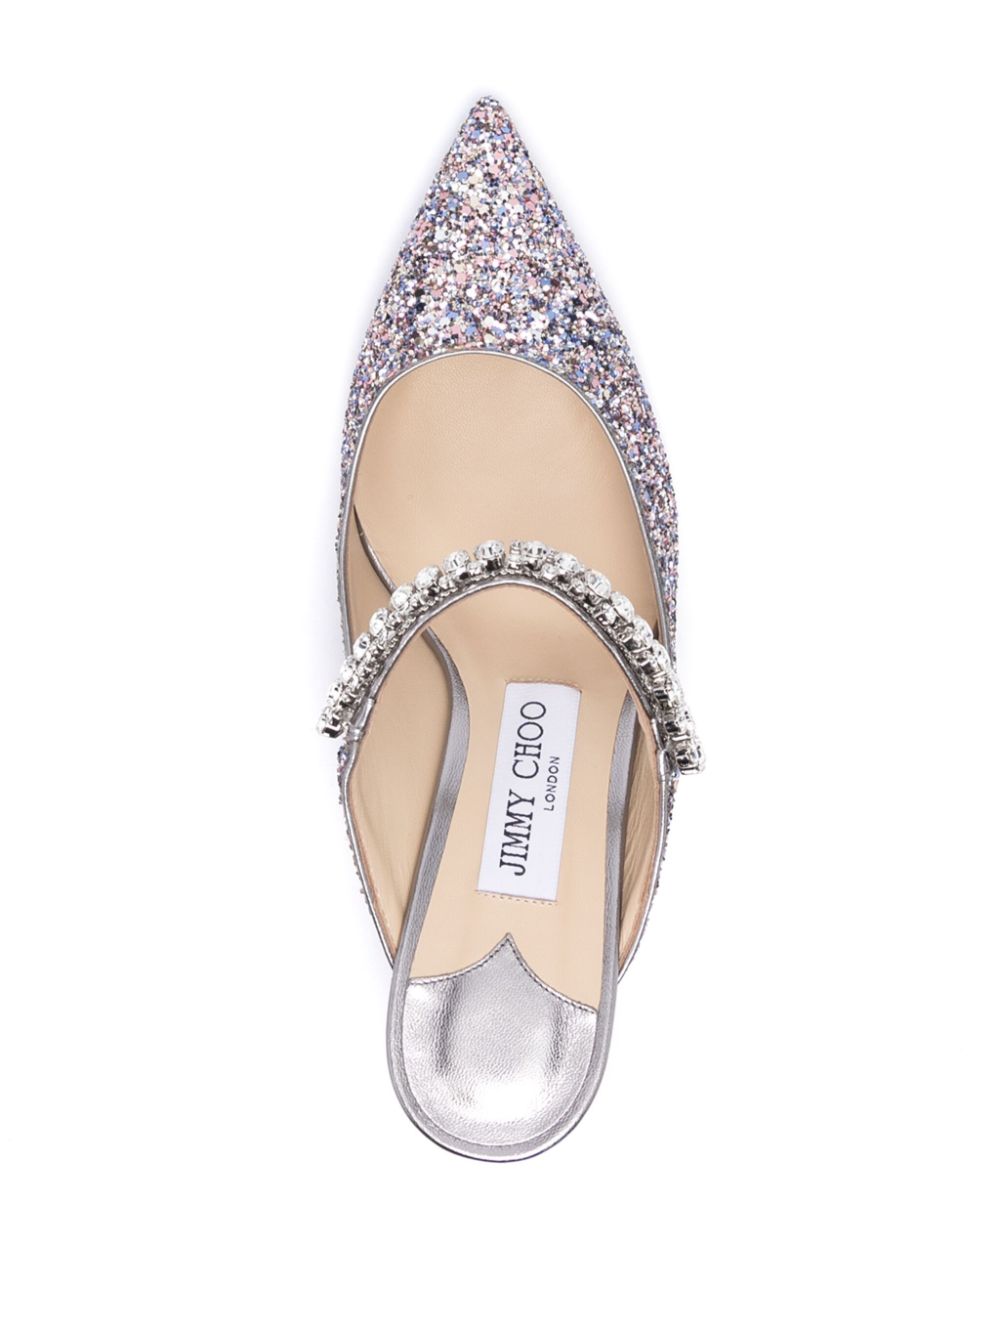 Silver Sparkling Pointed Toe Pumps - Mid Heel Stiletto Shoes for Women